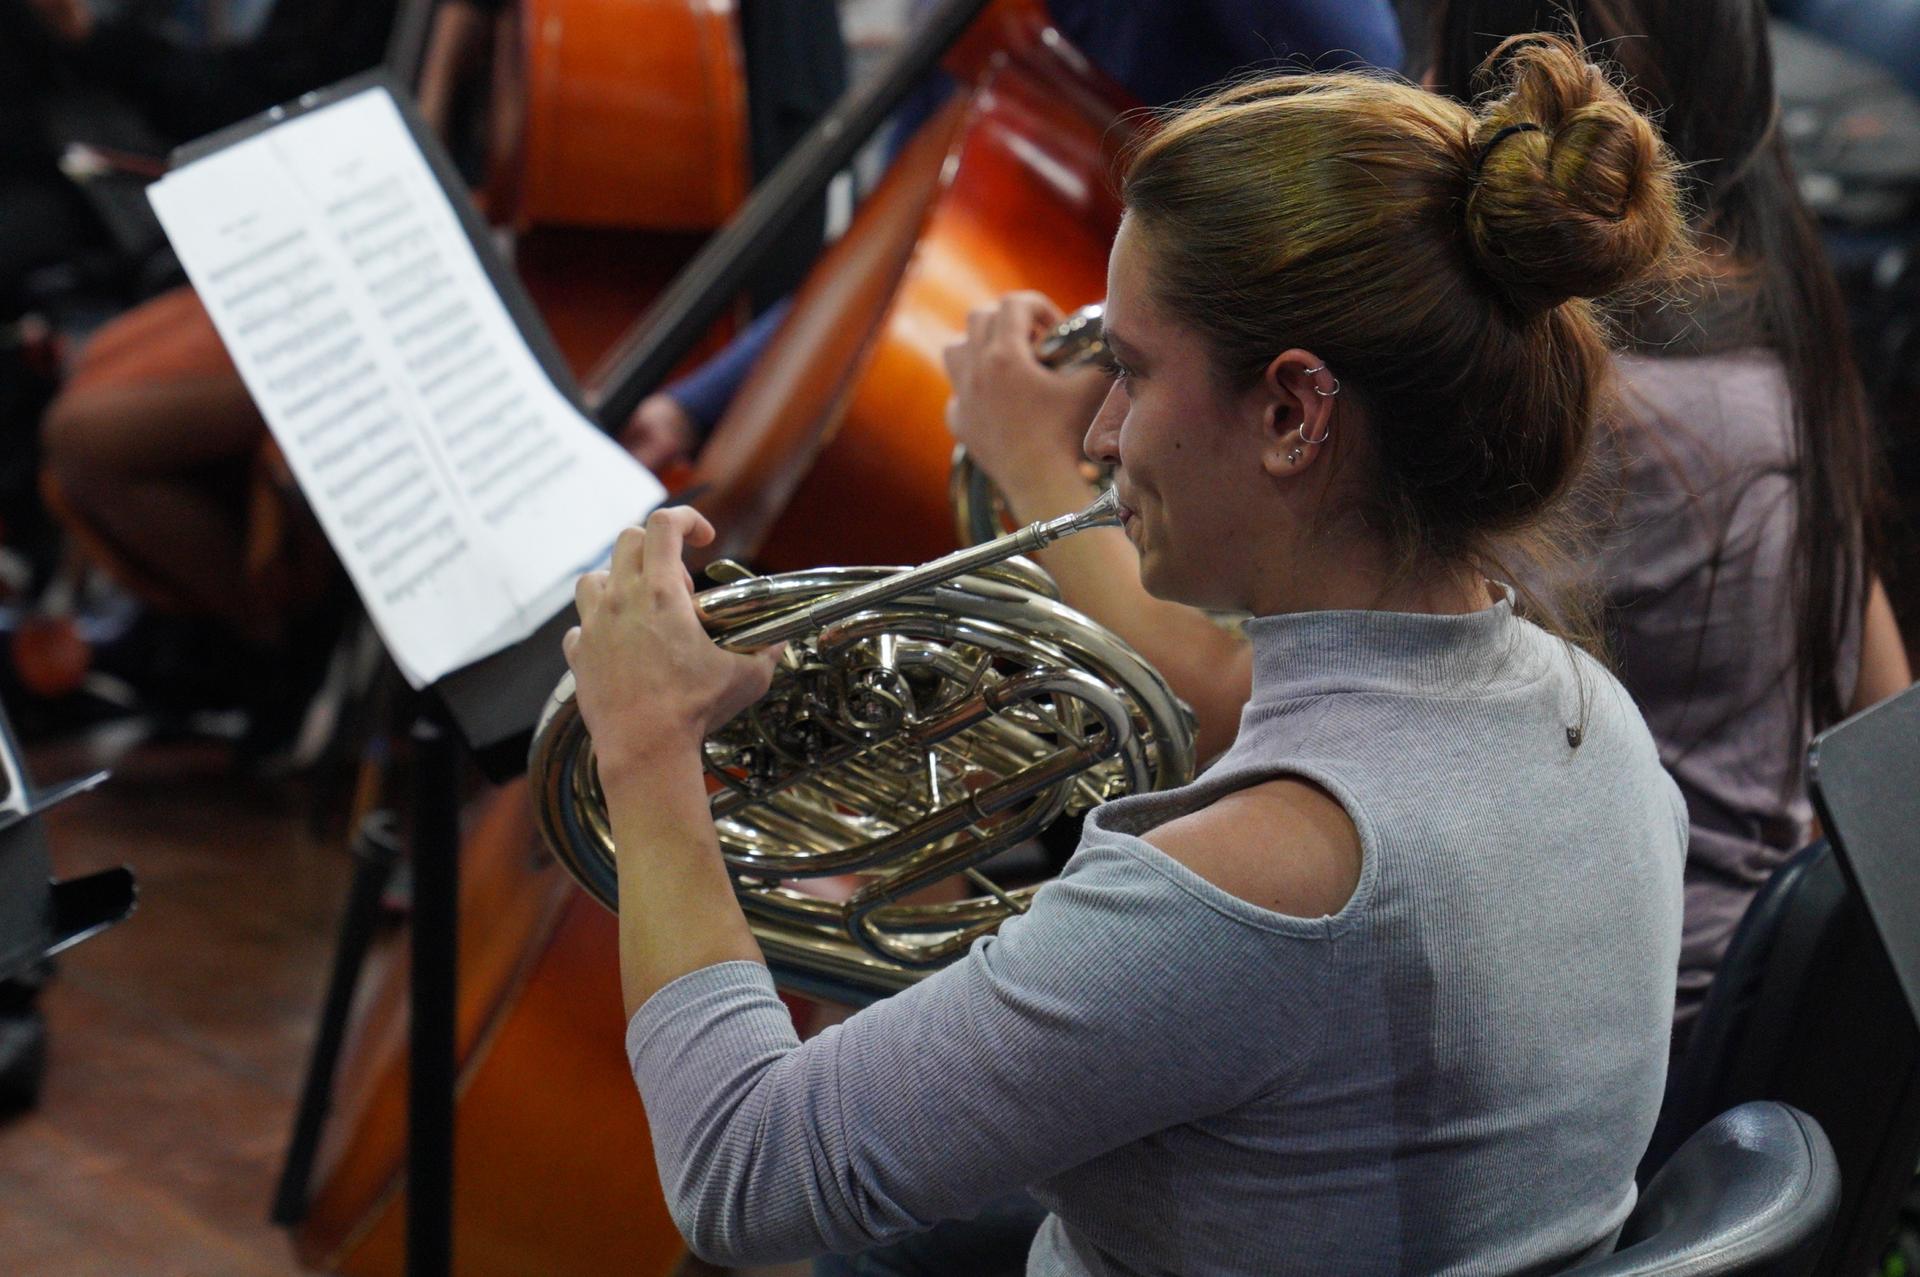 In Colombia less than 30% of musicians at professional orchestras are women.